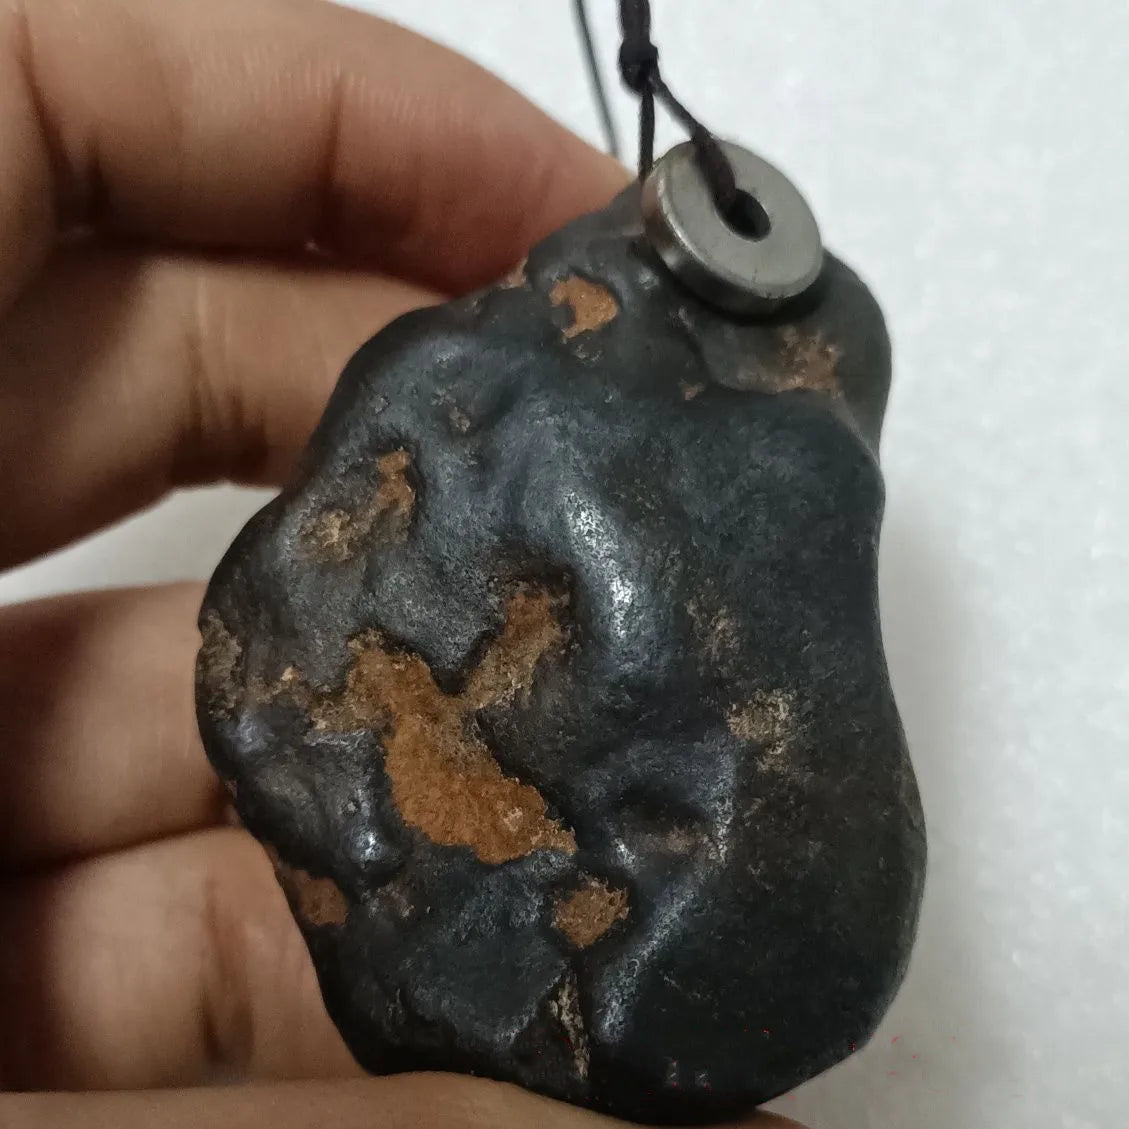 1Pcs Rare Natural Meteorite Iron Meteorite Protolith Strong Magnetism Falling Stone Collection Home Decorations Ornament Gift